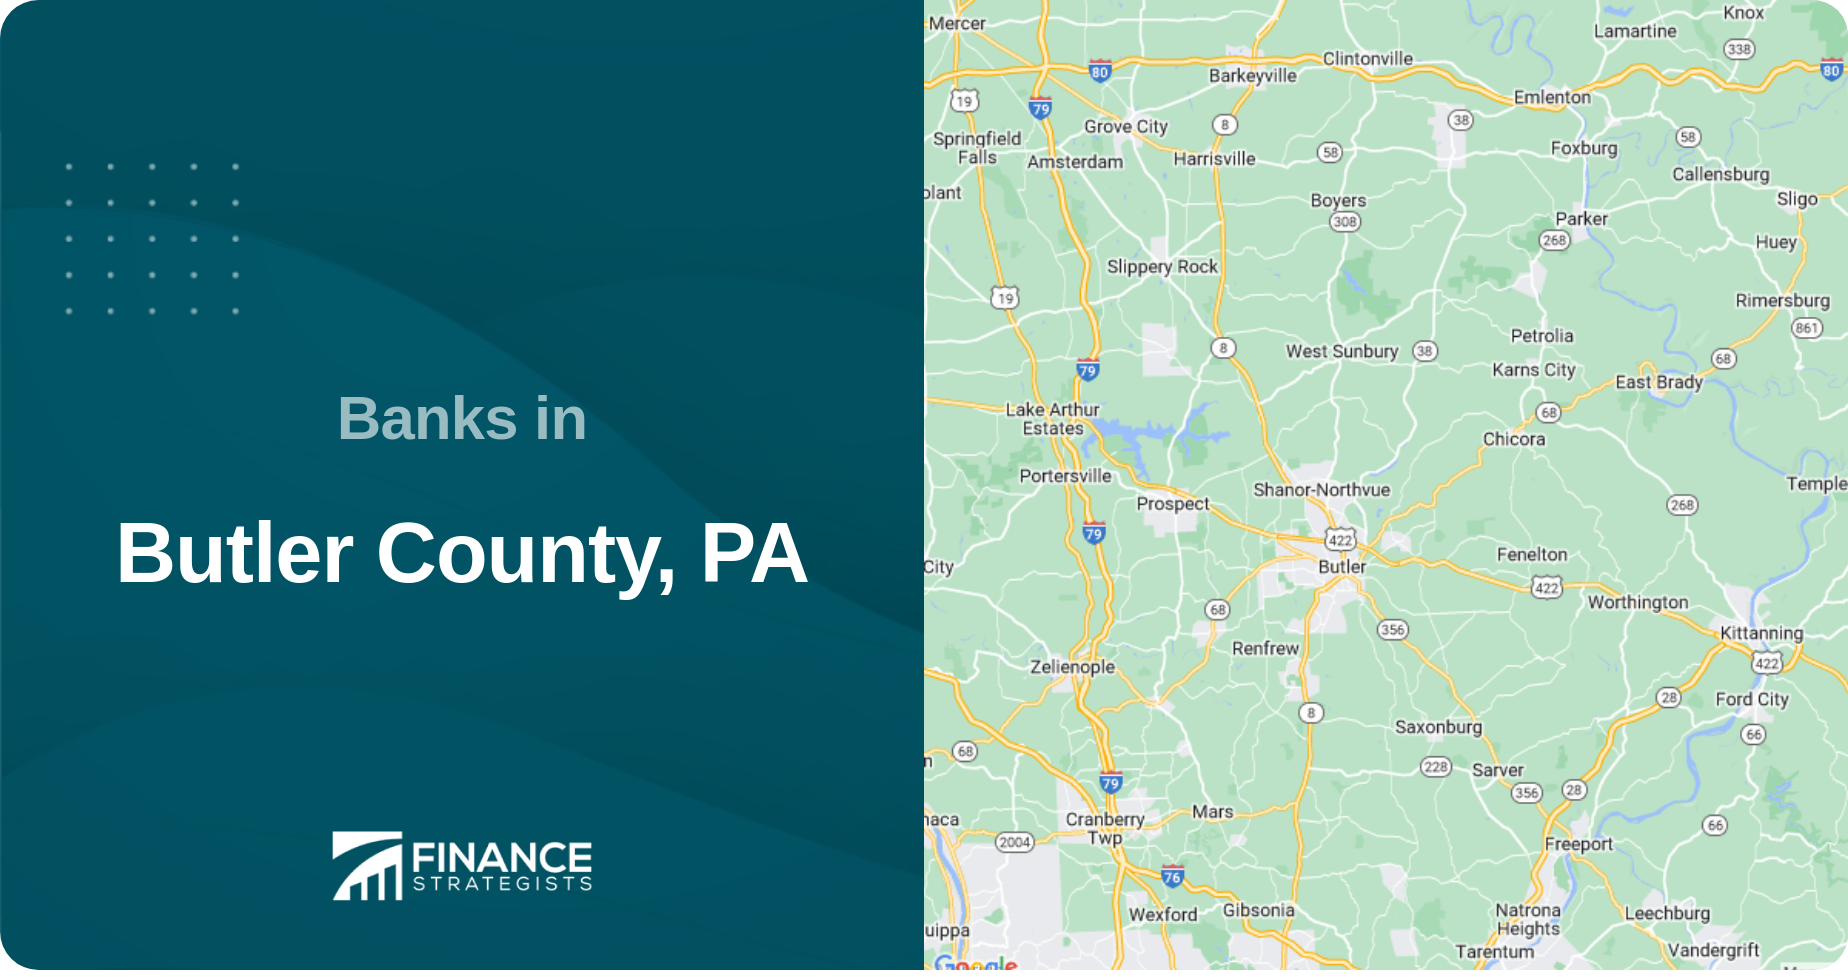 Banks in Butler County, PA